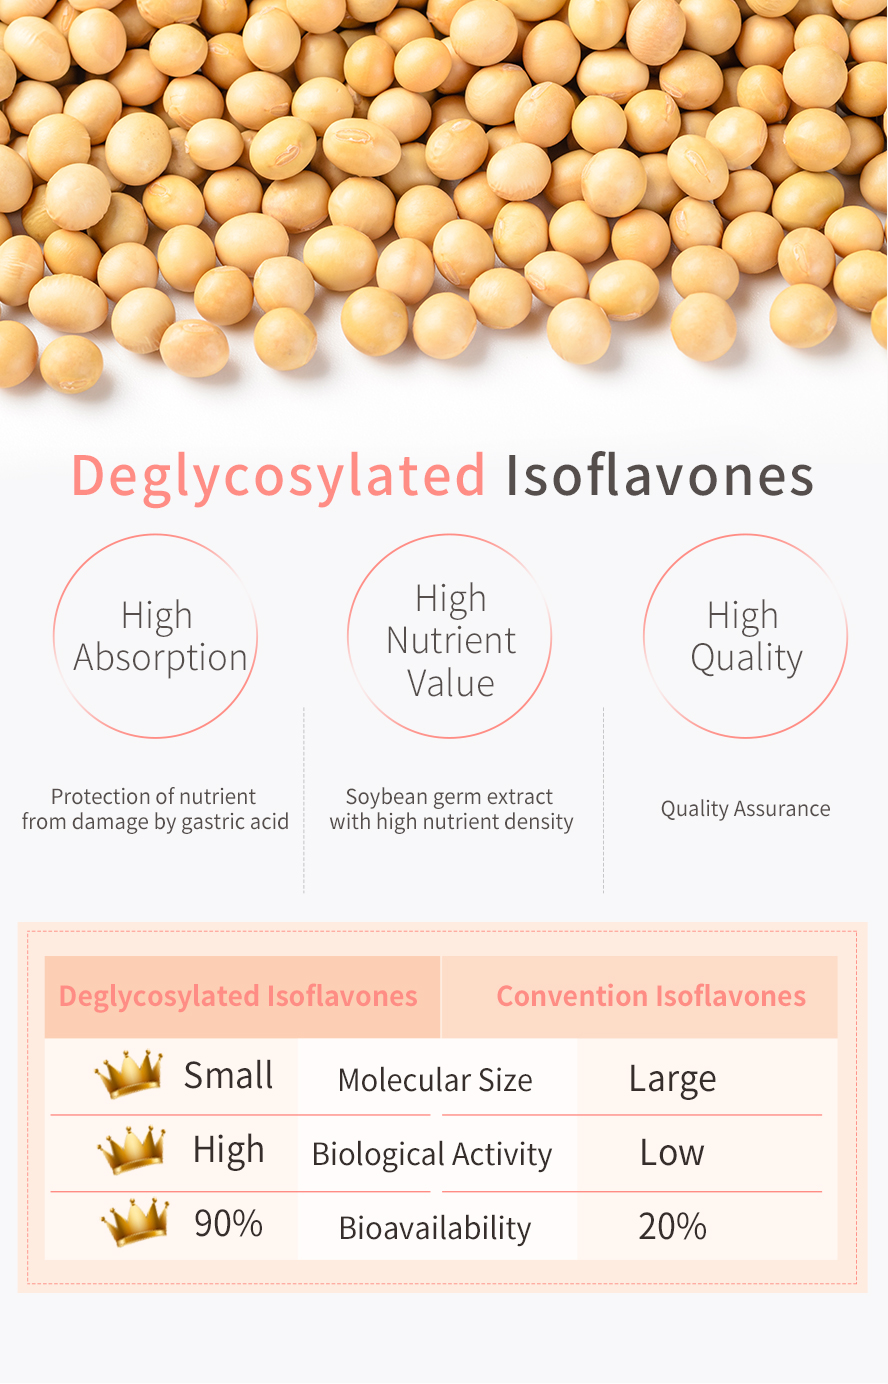 Deglycosylated form of isoflavones for best absorption and prevent damage from gastric acid